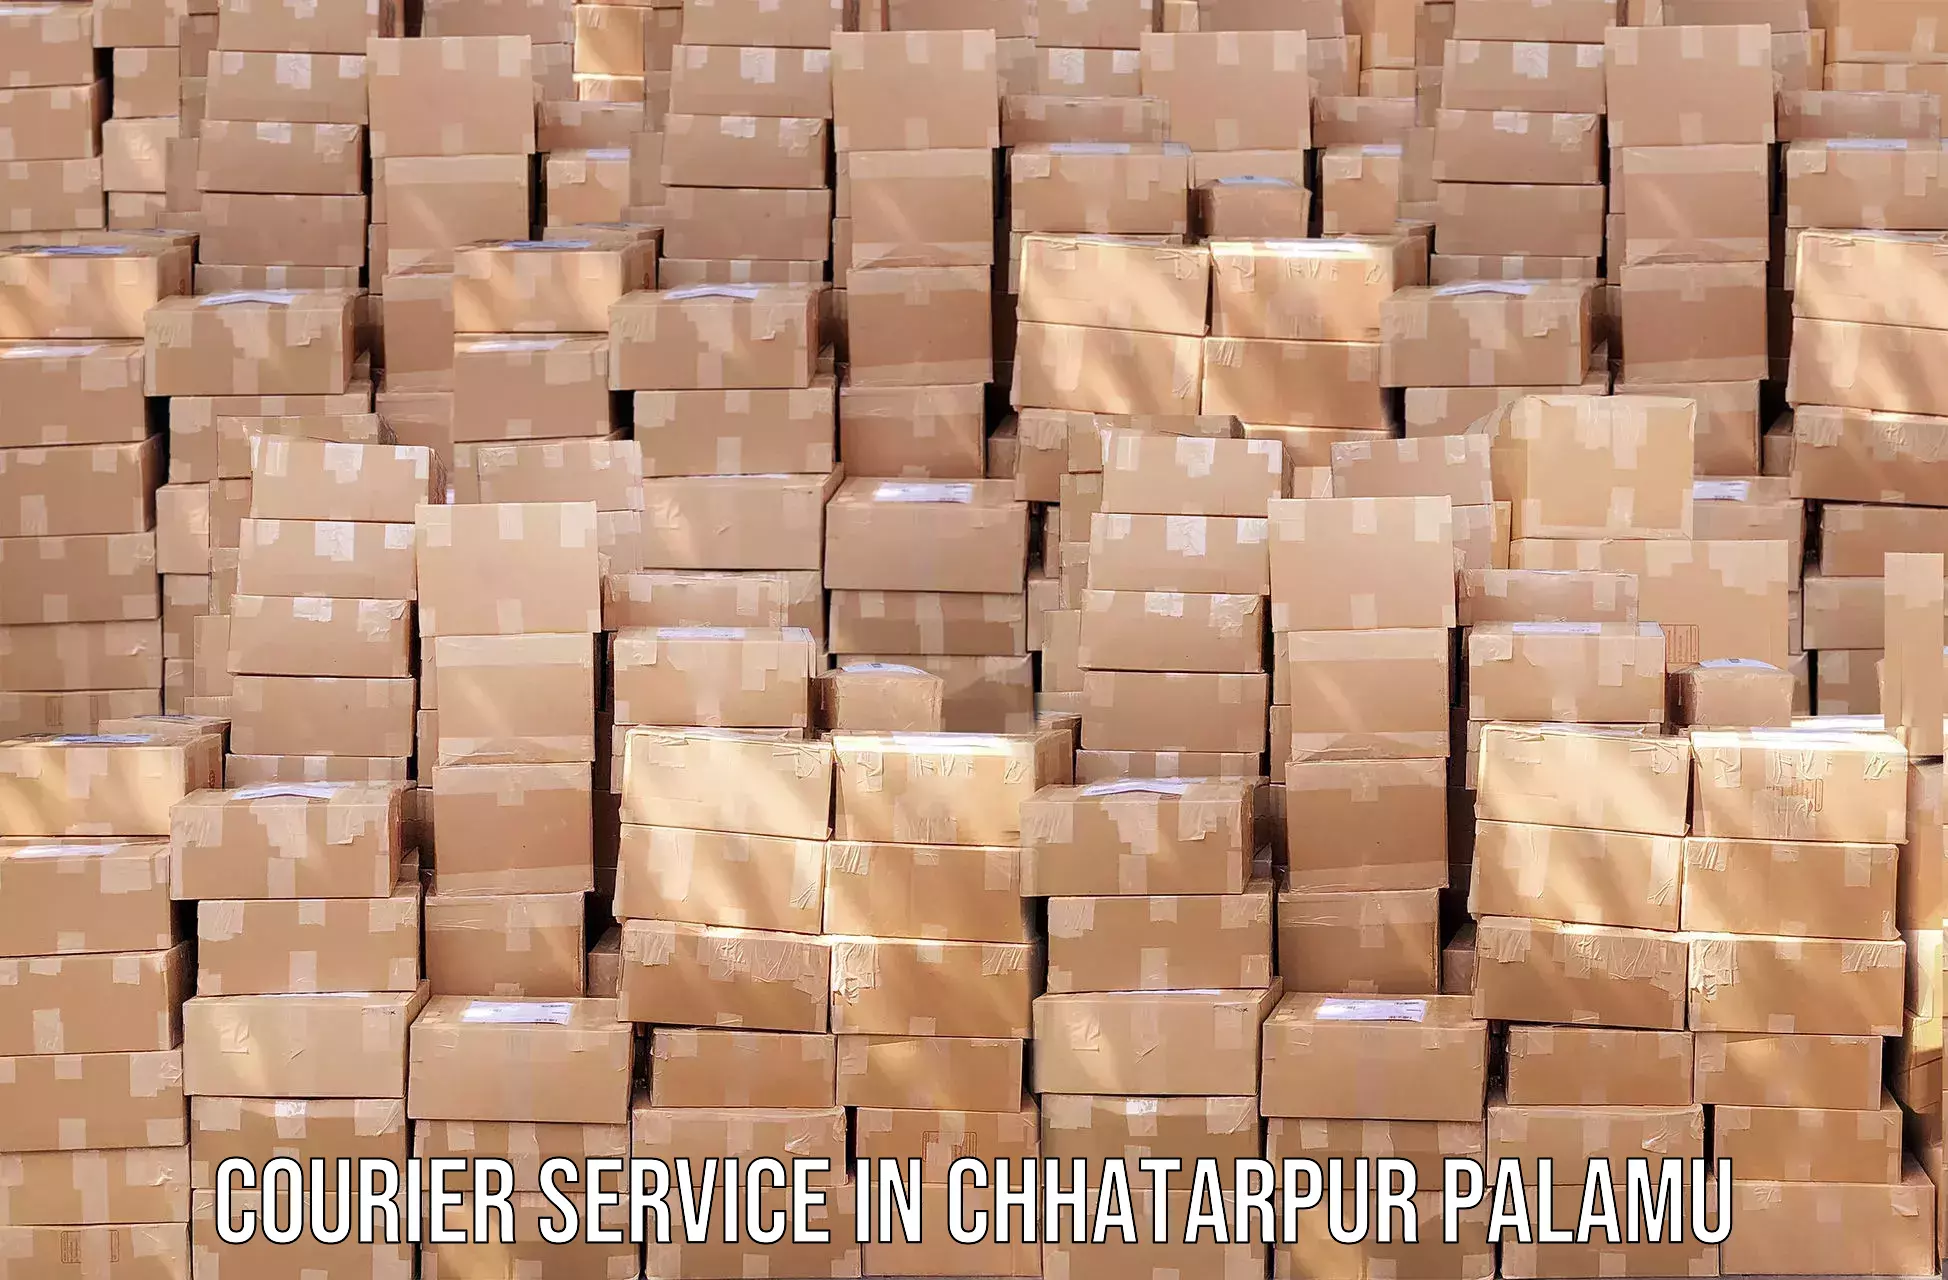 Sustainable shipping practices in Chhatarpur Palamu